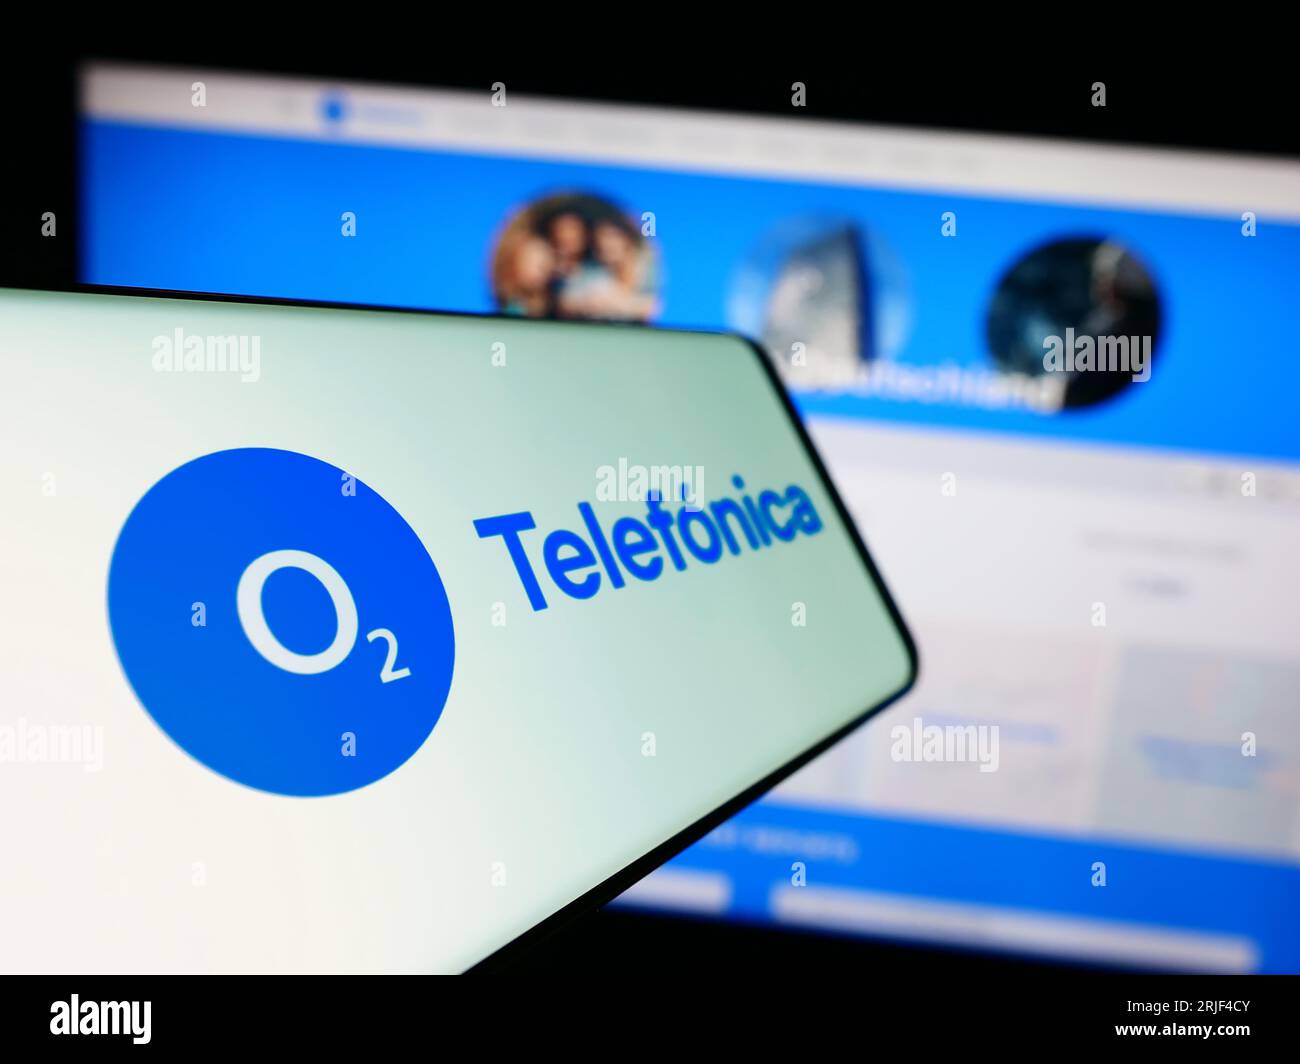 Mobile phone with logo of company Telefonica Deutschland Holding AG on screen in front of website. Focus on center-left of phone display. Stock Photo